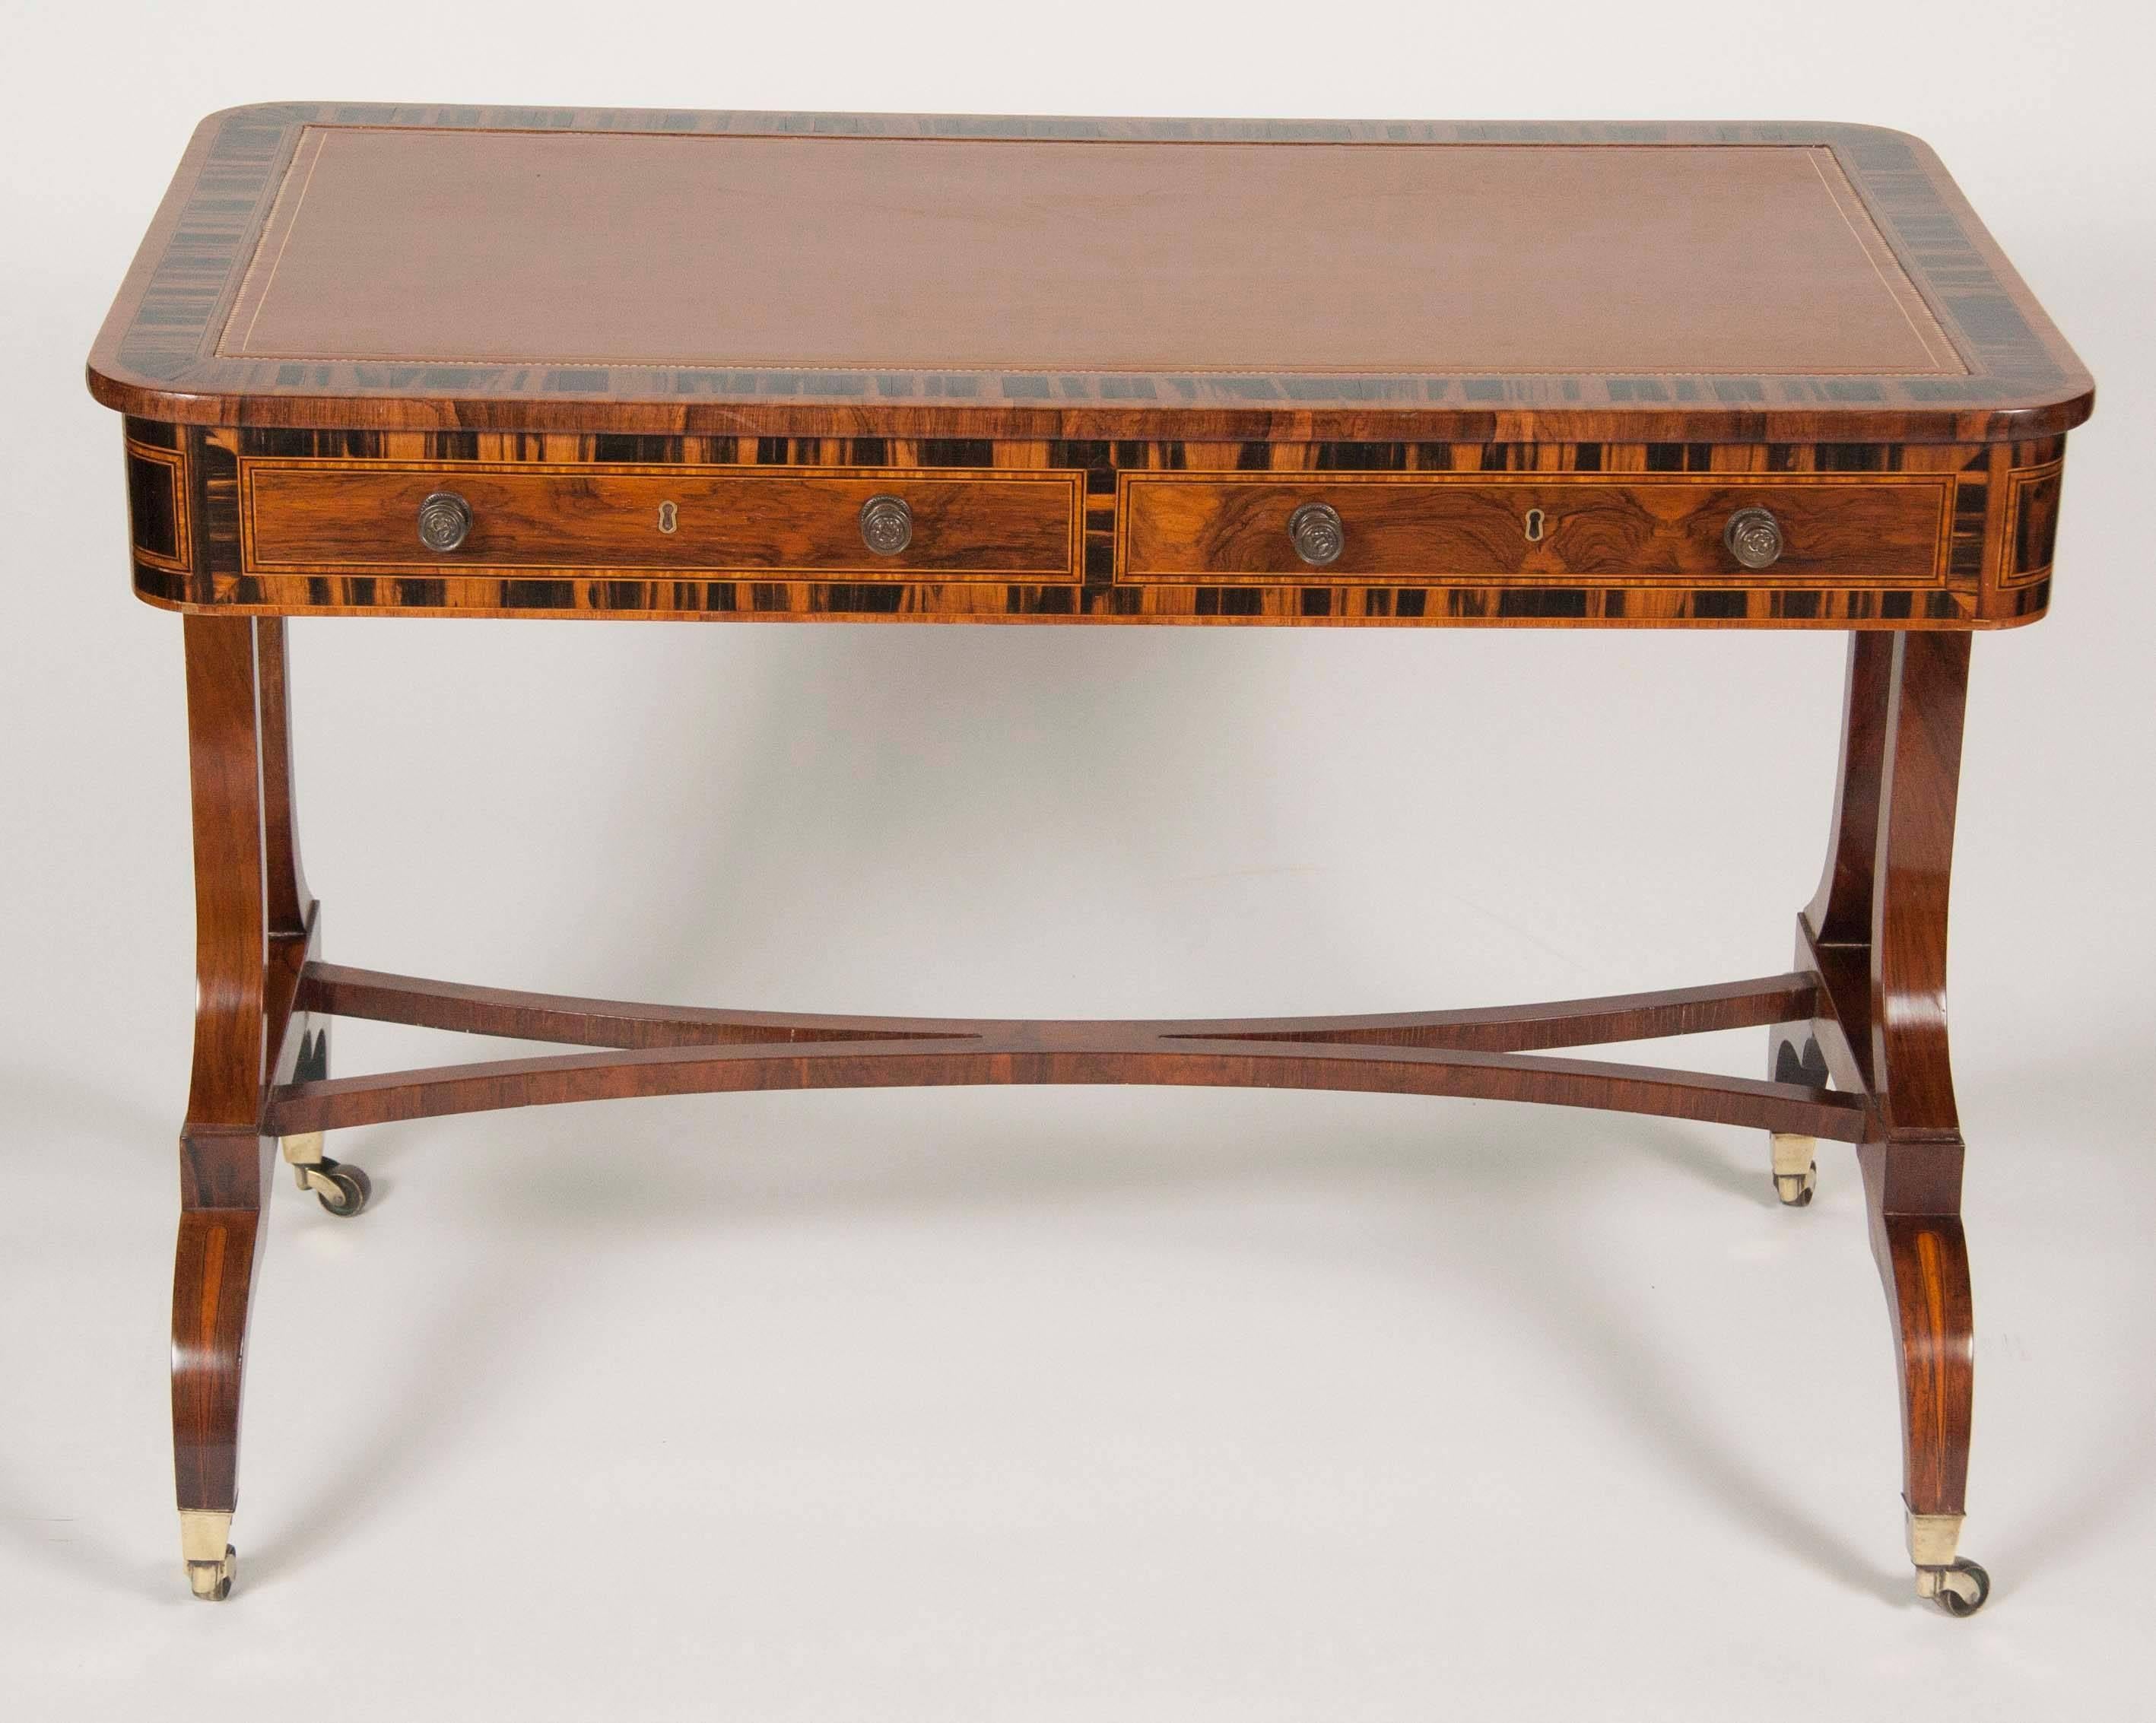 A Regency rosewood and calamander library table of exquisite form and execution.